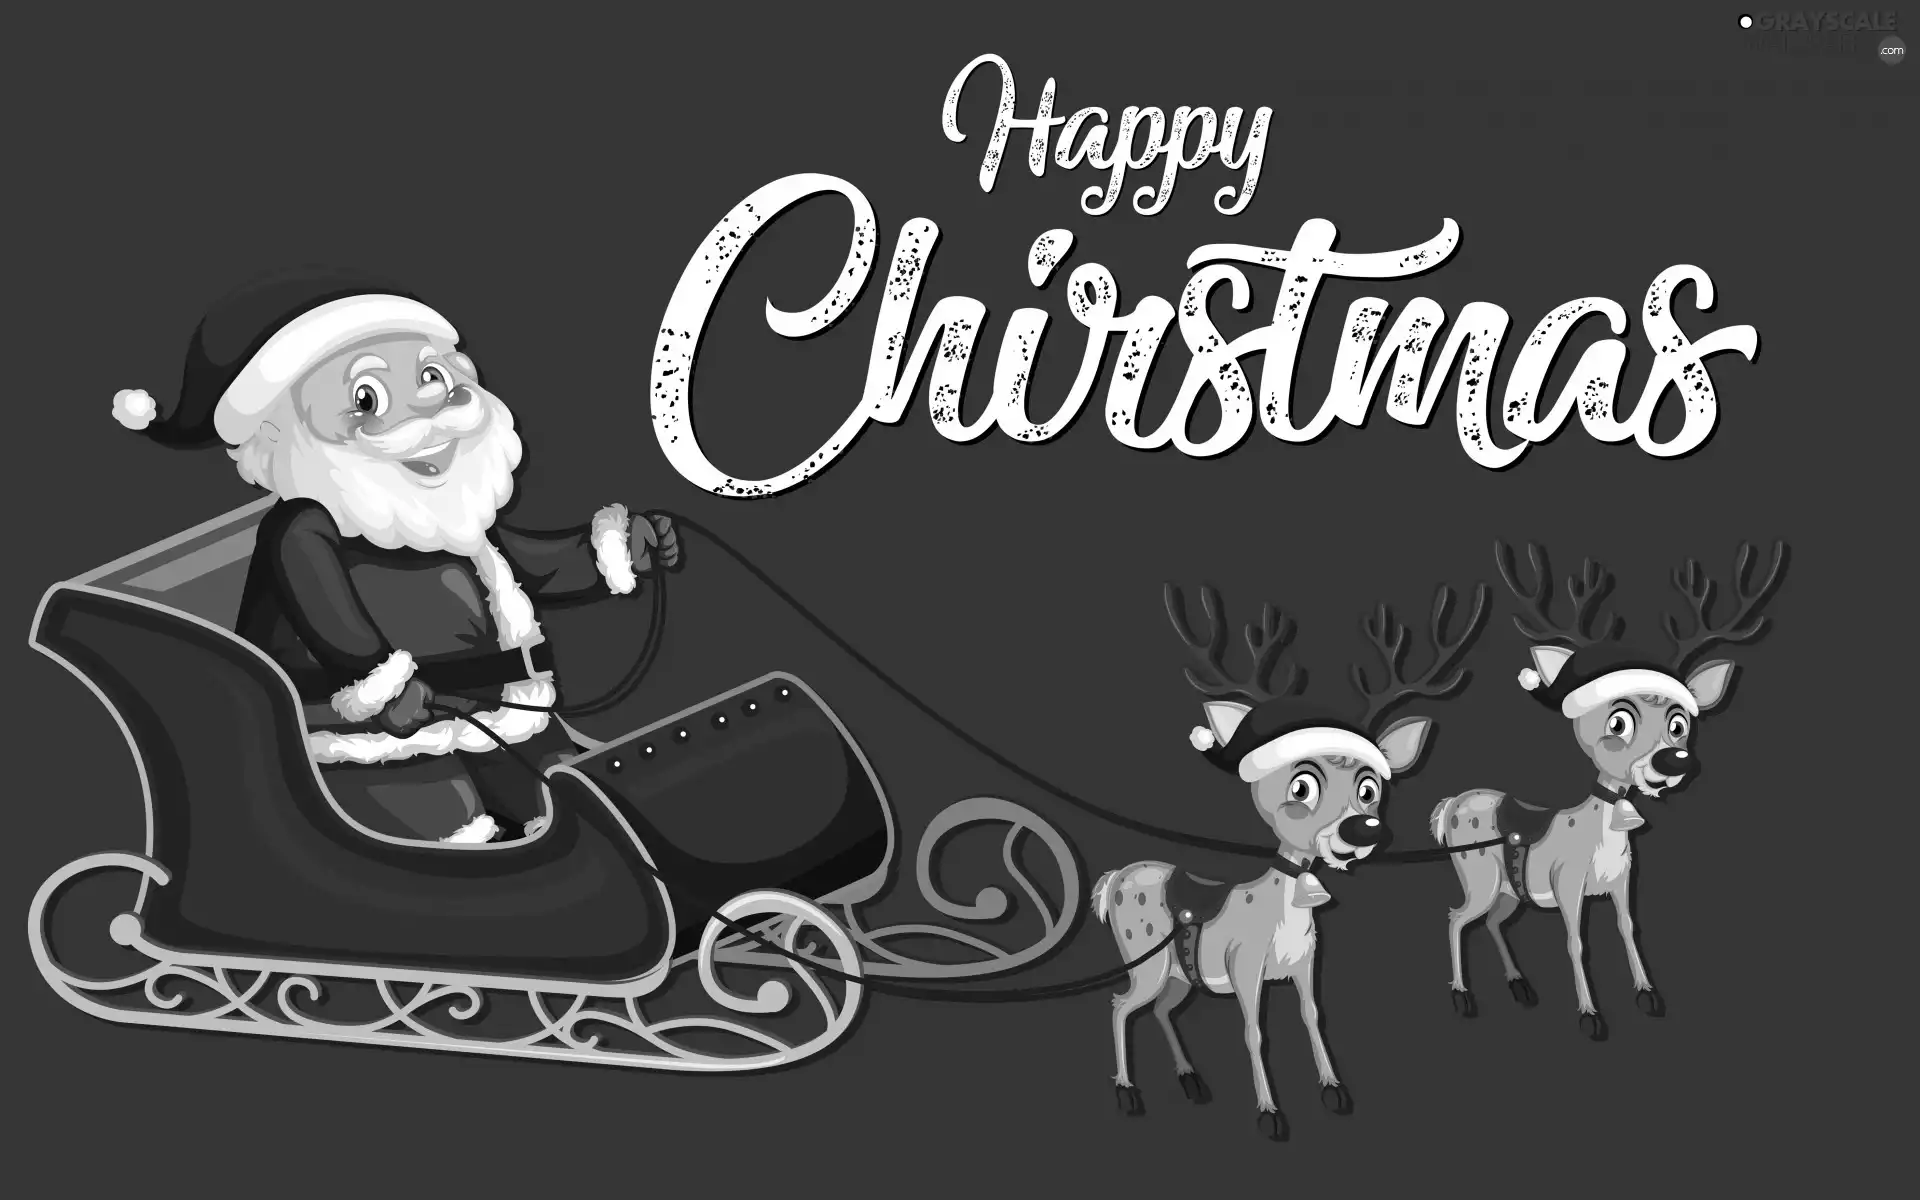 team, text, background, Merry Christmas, Red, Santa Claus, New Year, sleigh